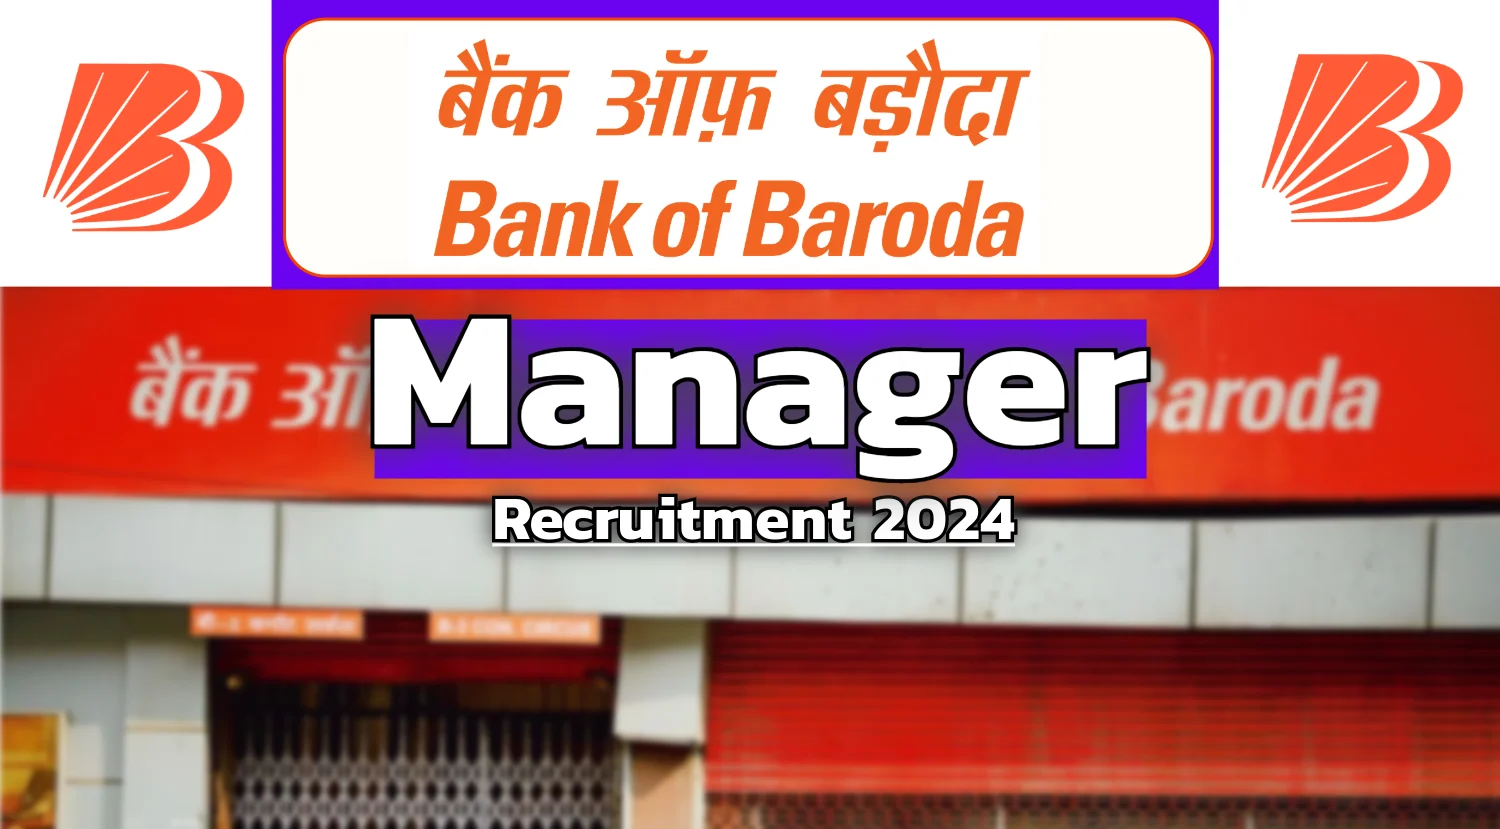 Bank of Baroda Manager Recruitment 2024 Notification Out